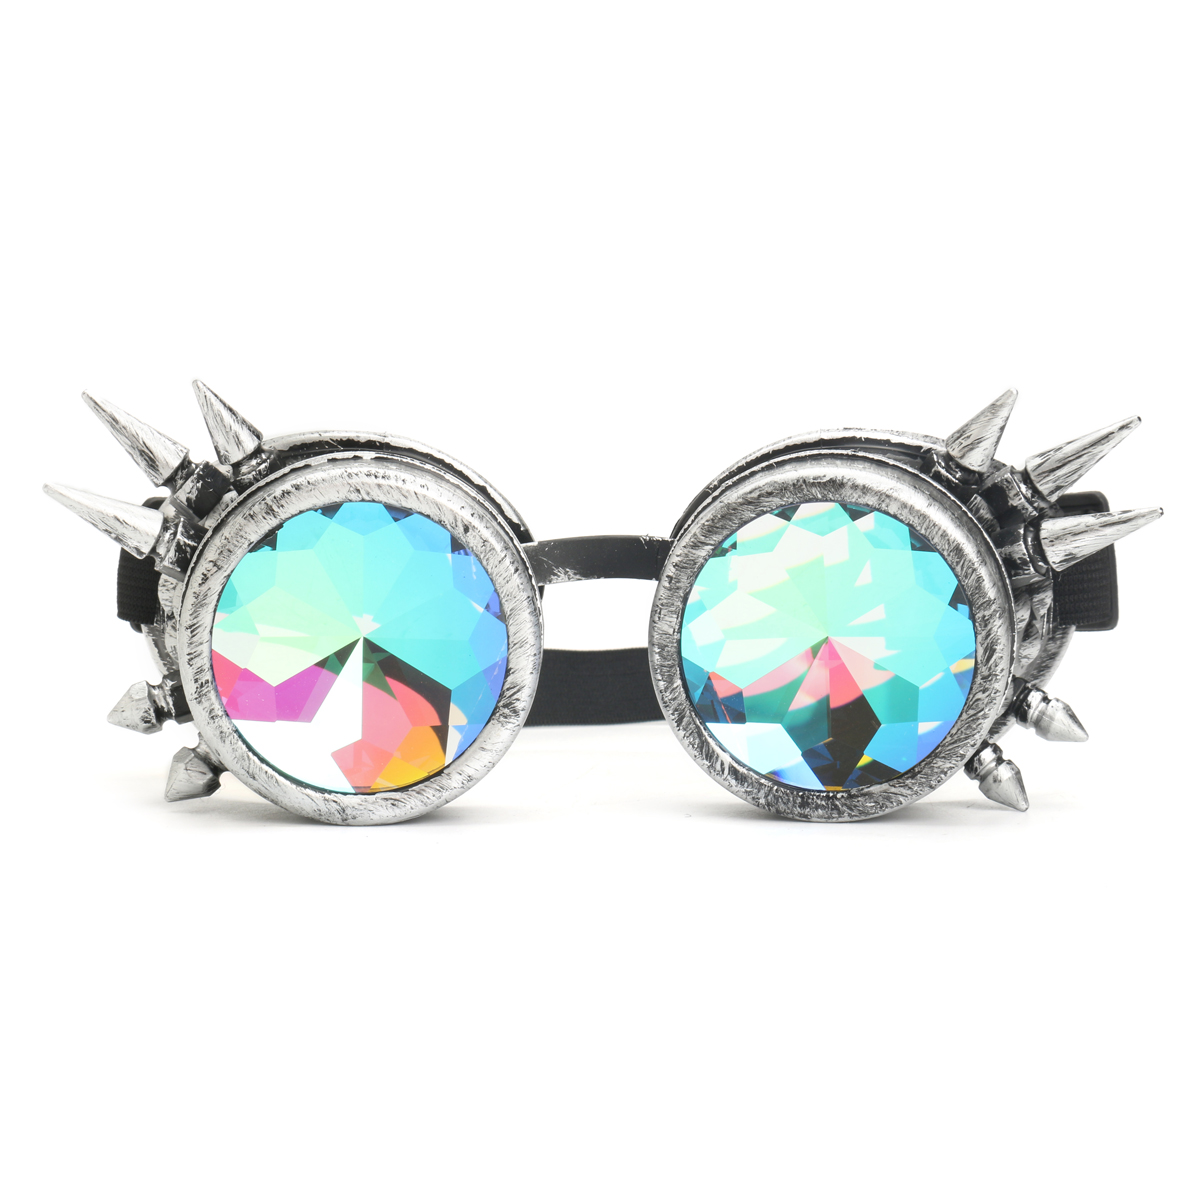 3-Colors-Festivals-Rave-Kaleidoscope-Goggles-Rainbow-Glasses-Prism-Diffraction-Crystal-1181991